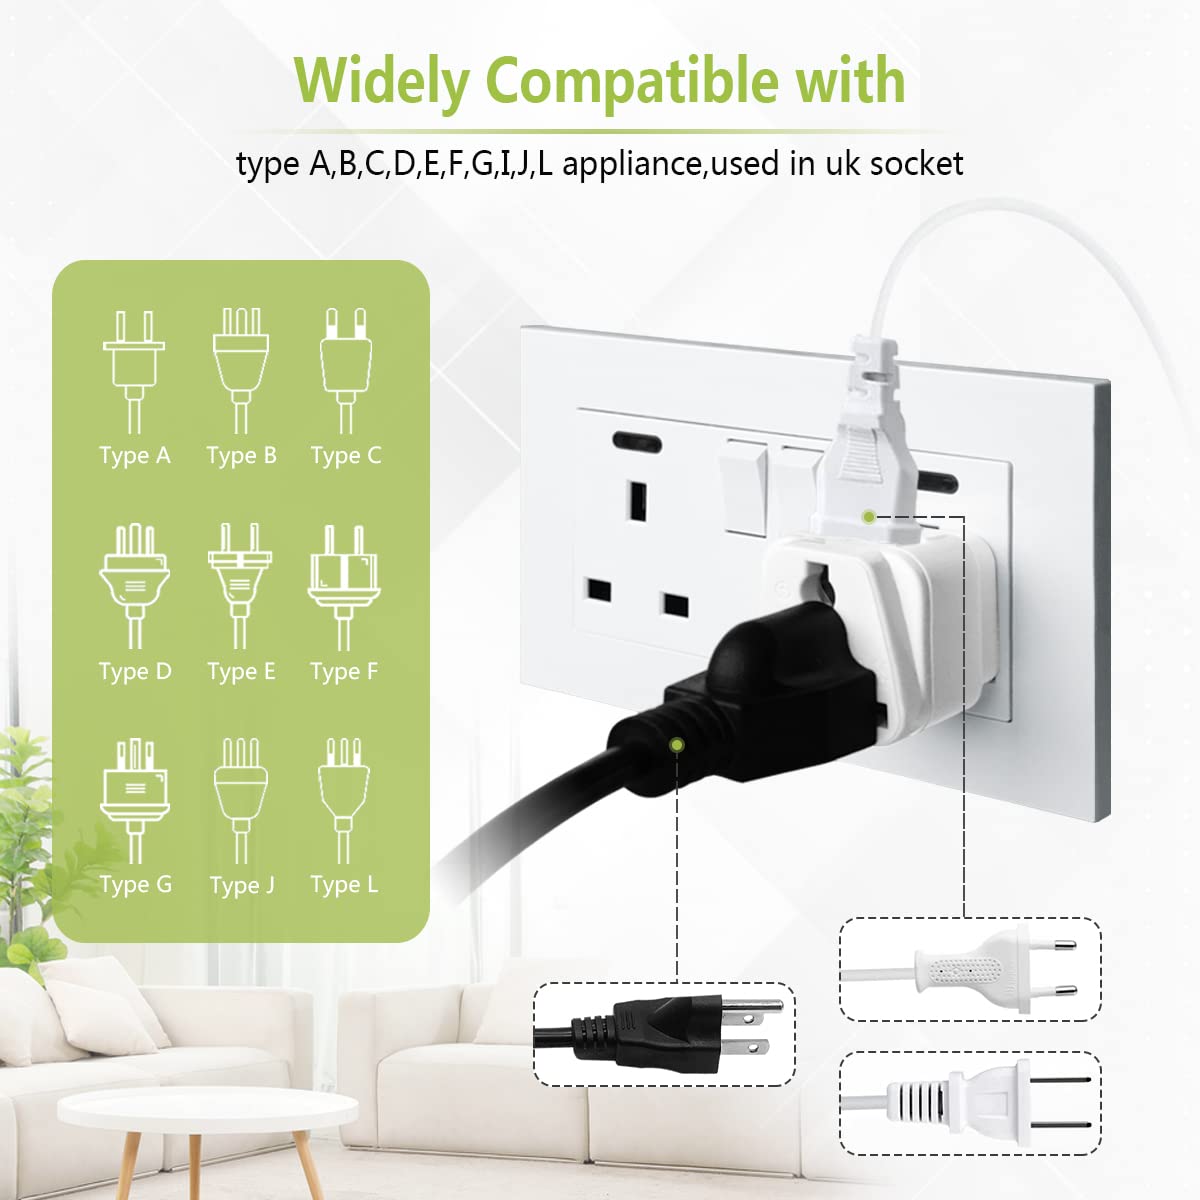 3-PACK UK Travel Adapter,SHUOMAO EU/US to UK Plug Adaptor with 13A Fuse,2 Pin to 3 Pin Converter Plug Adapter for Shaver/Toothbrush,Laptop(European/USA/Indian/Itatly/Swiss to UK Plug Adapter)